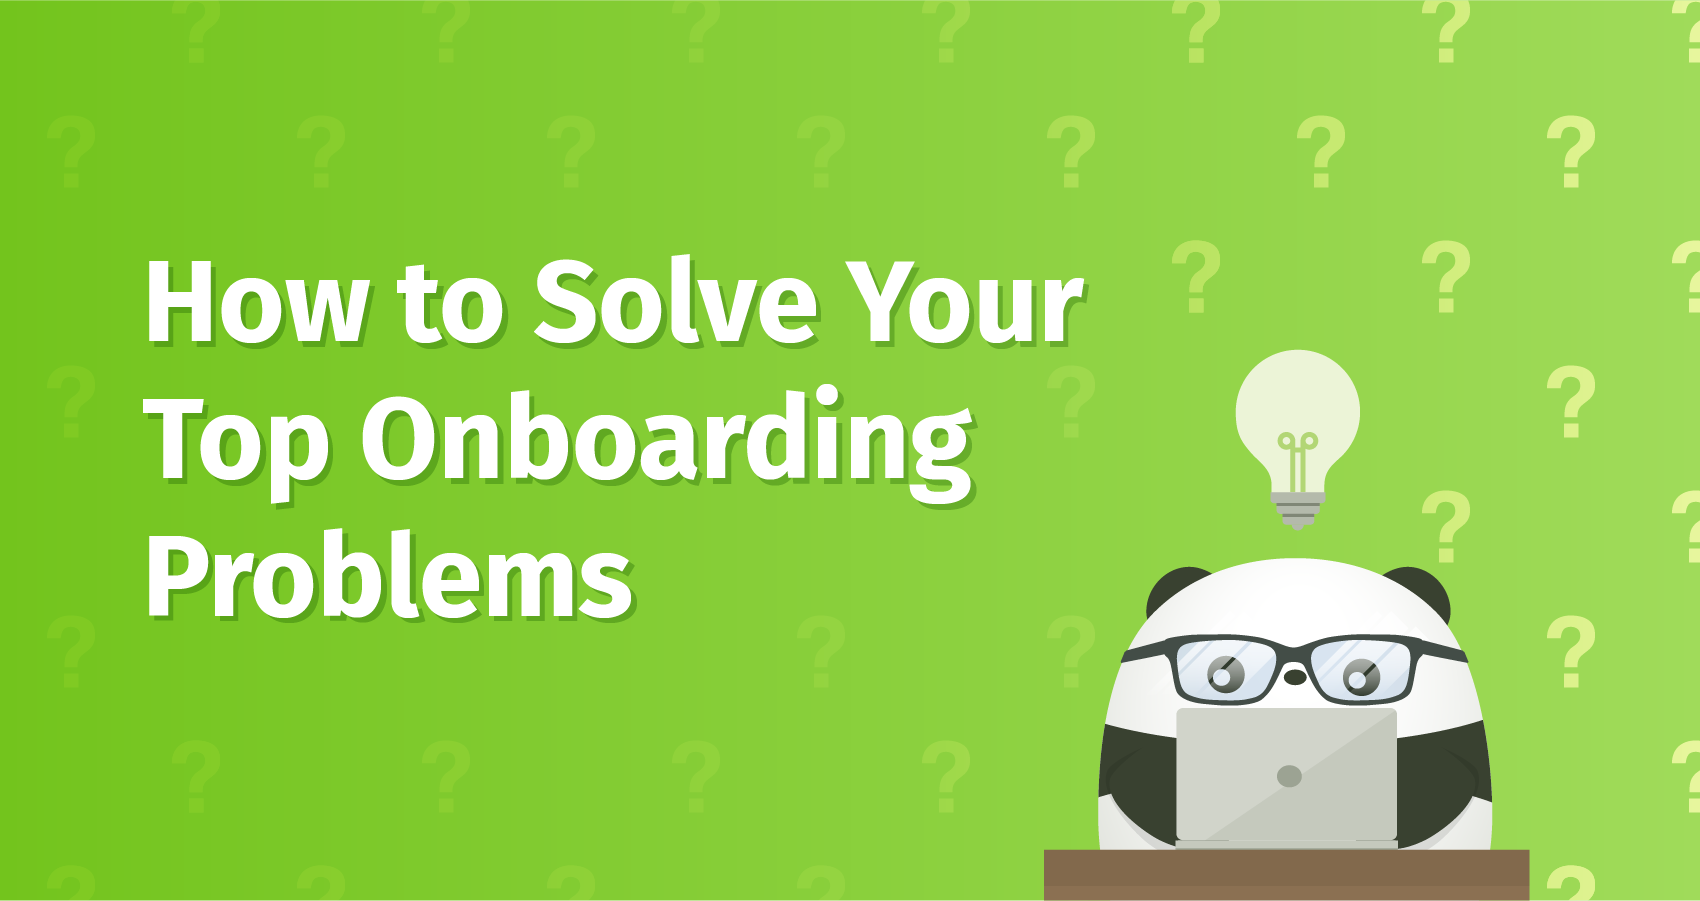 How to Solve Your Top Onboarding Problems